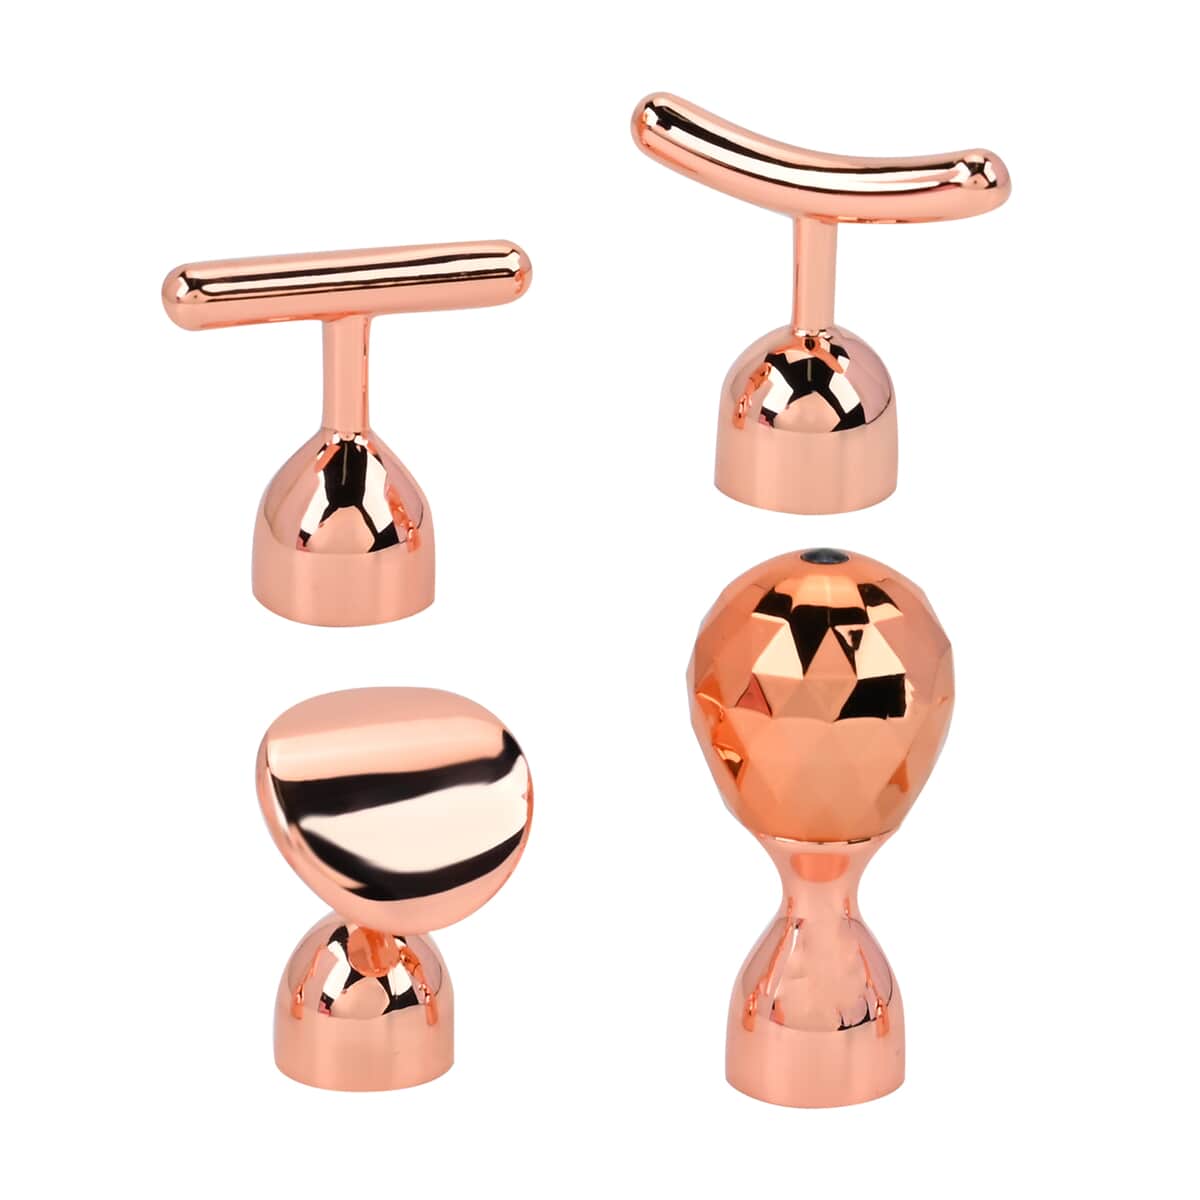 4-in-1 Face Massager Rollers with Four Interchangeable Massage Heads - Rose Gold, 1xAA Battery Not Including image number 7